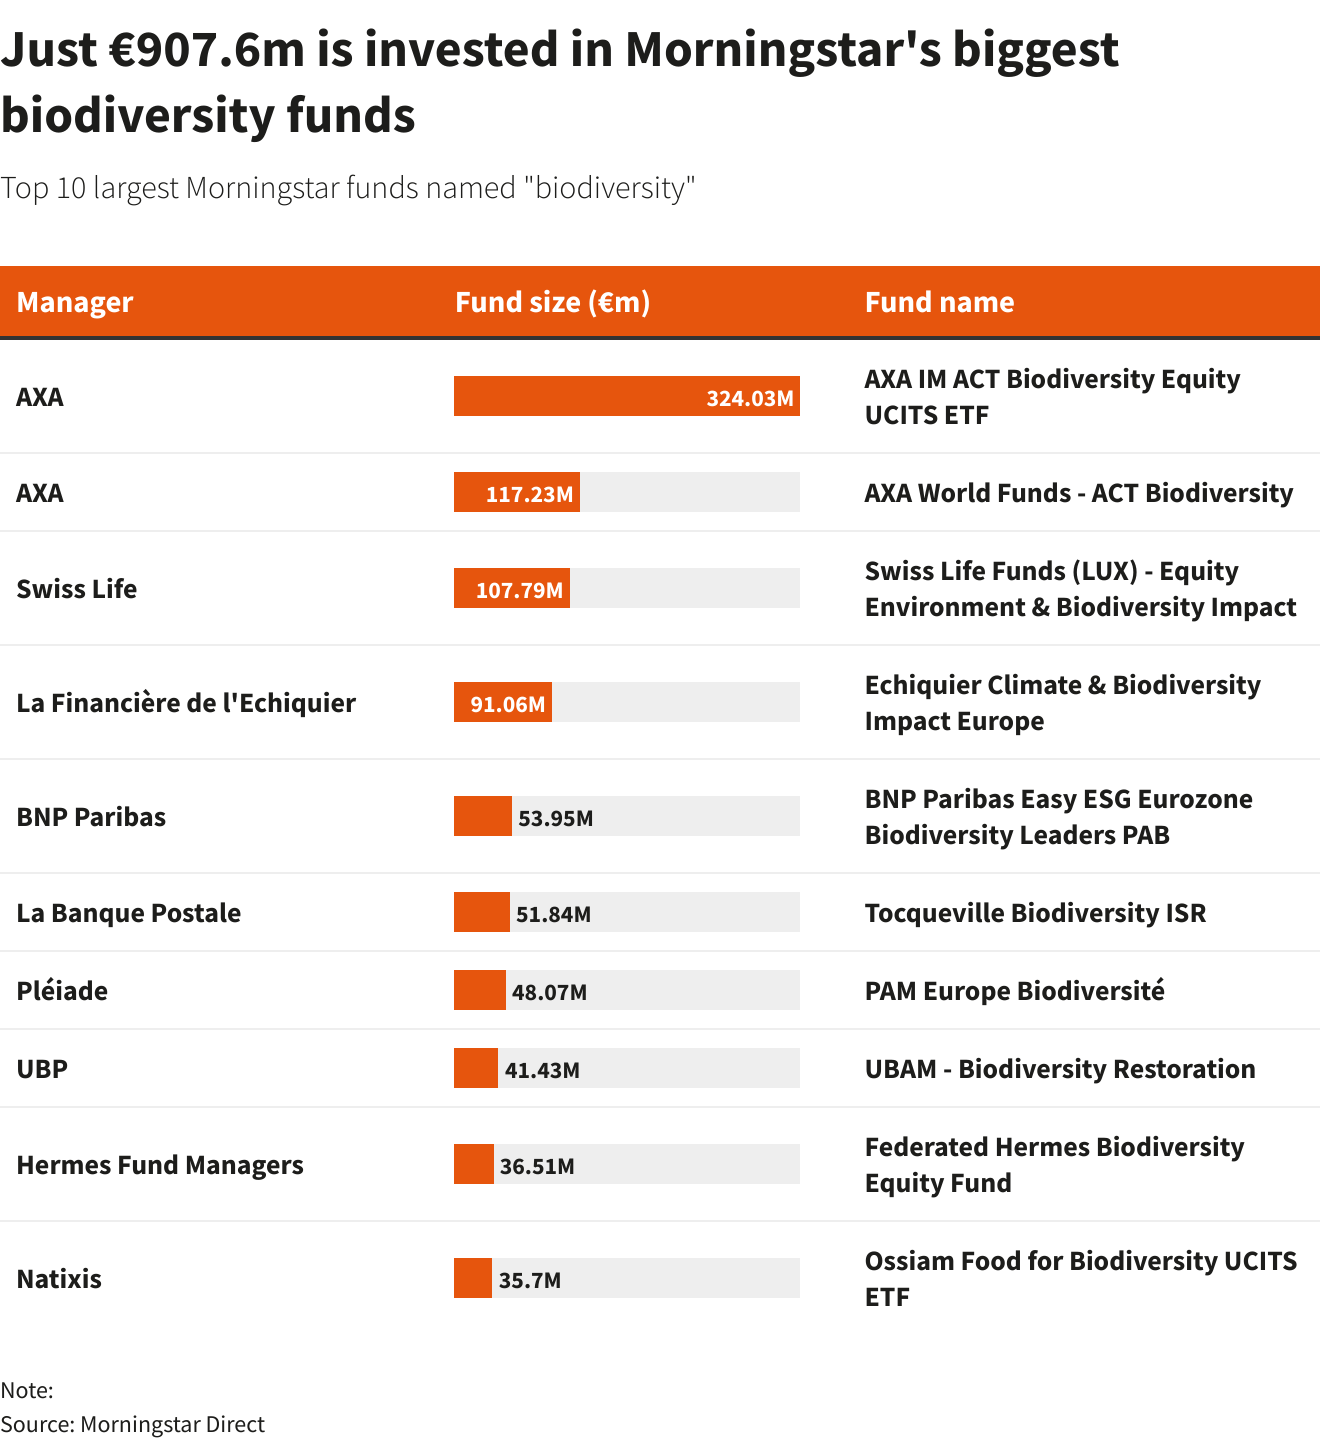 Top Ten largest Morningstar funds named “biodiversity”. Just 907.6 million euros are invested in Morningstar’s top 10 equity funds with biodiversity in their name. Data: Morningstar Direct. Graphic: Reuters